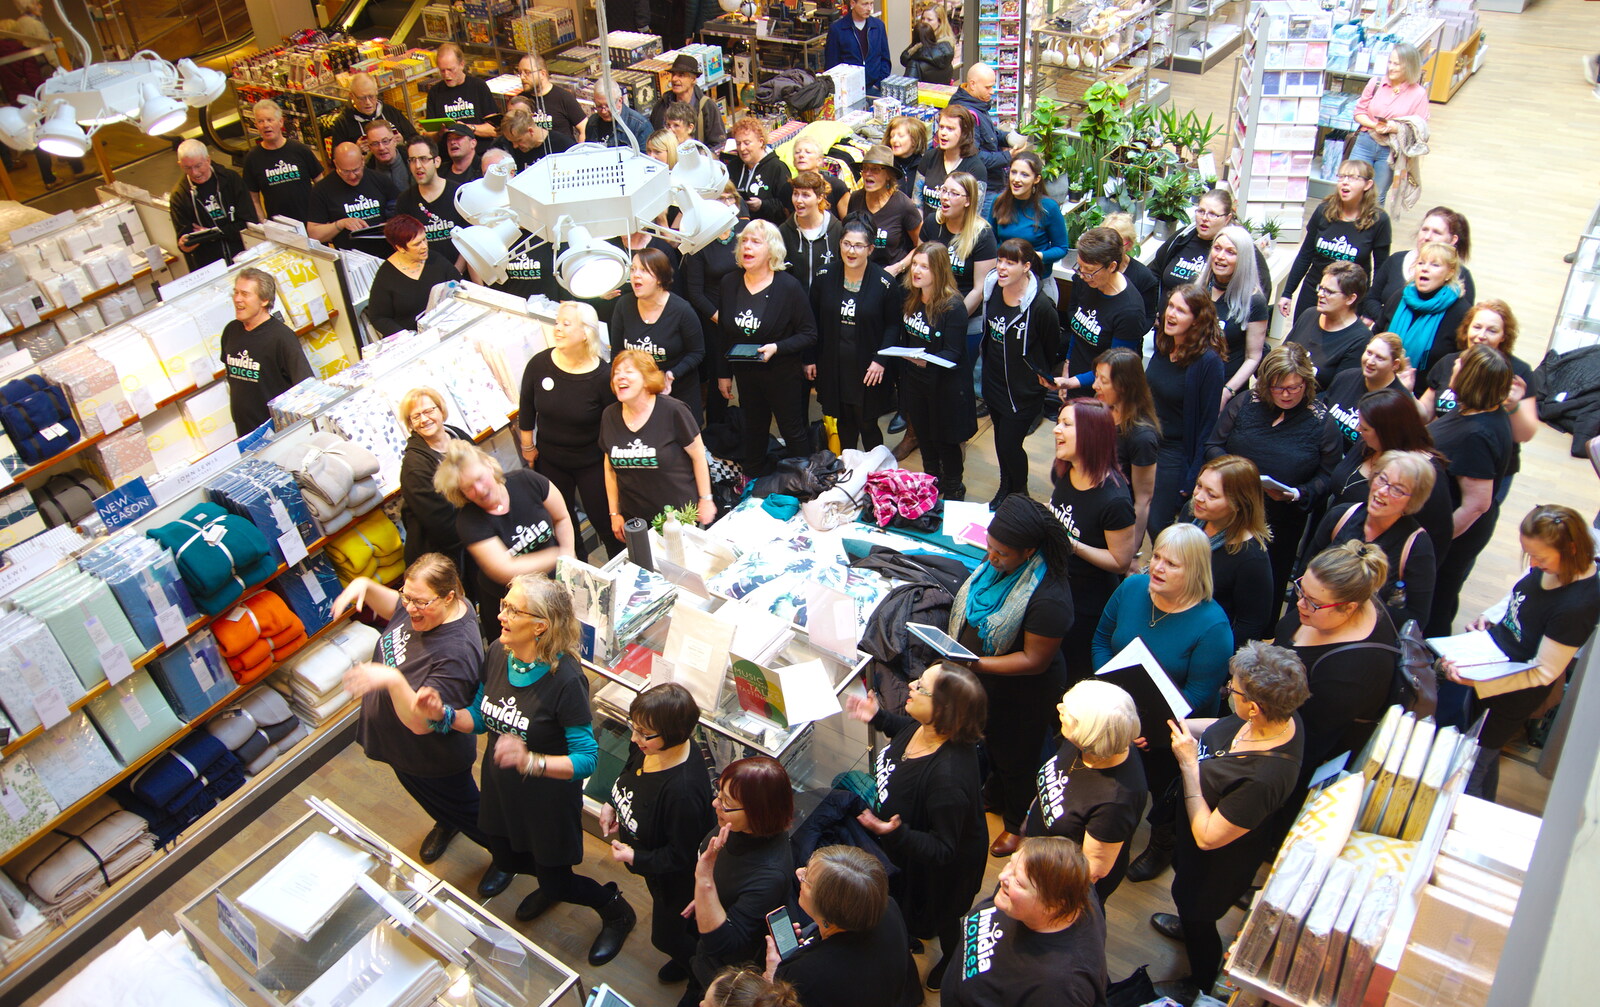 The full choir from Singing in John Lewis, Norwich, Norfolk - 13th April 2019